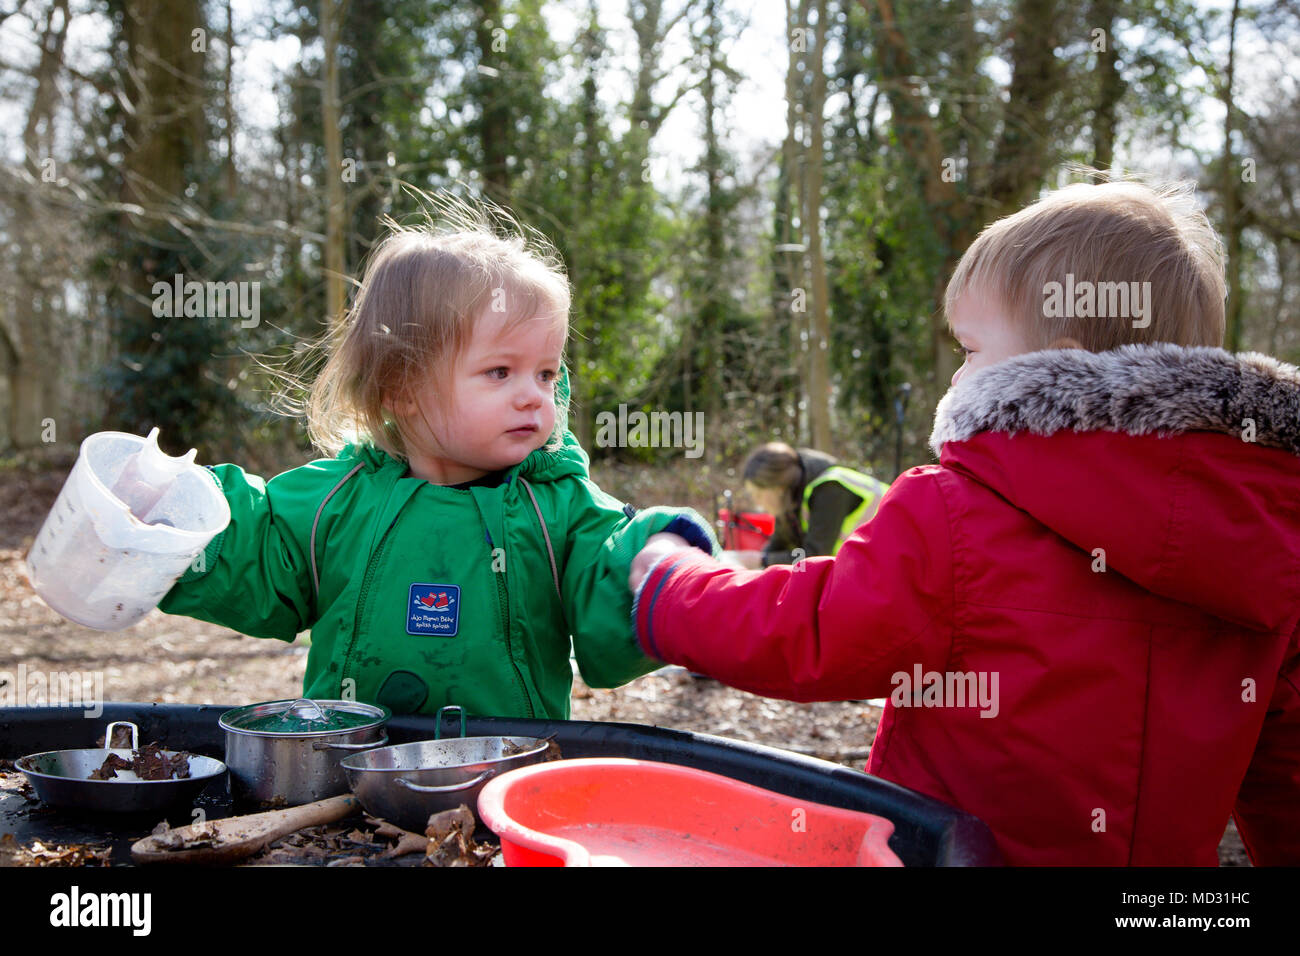 Toddlers playing with a mud kitchen Stock Photo